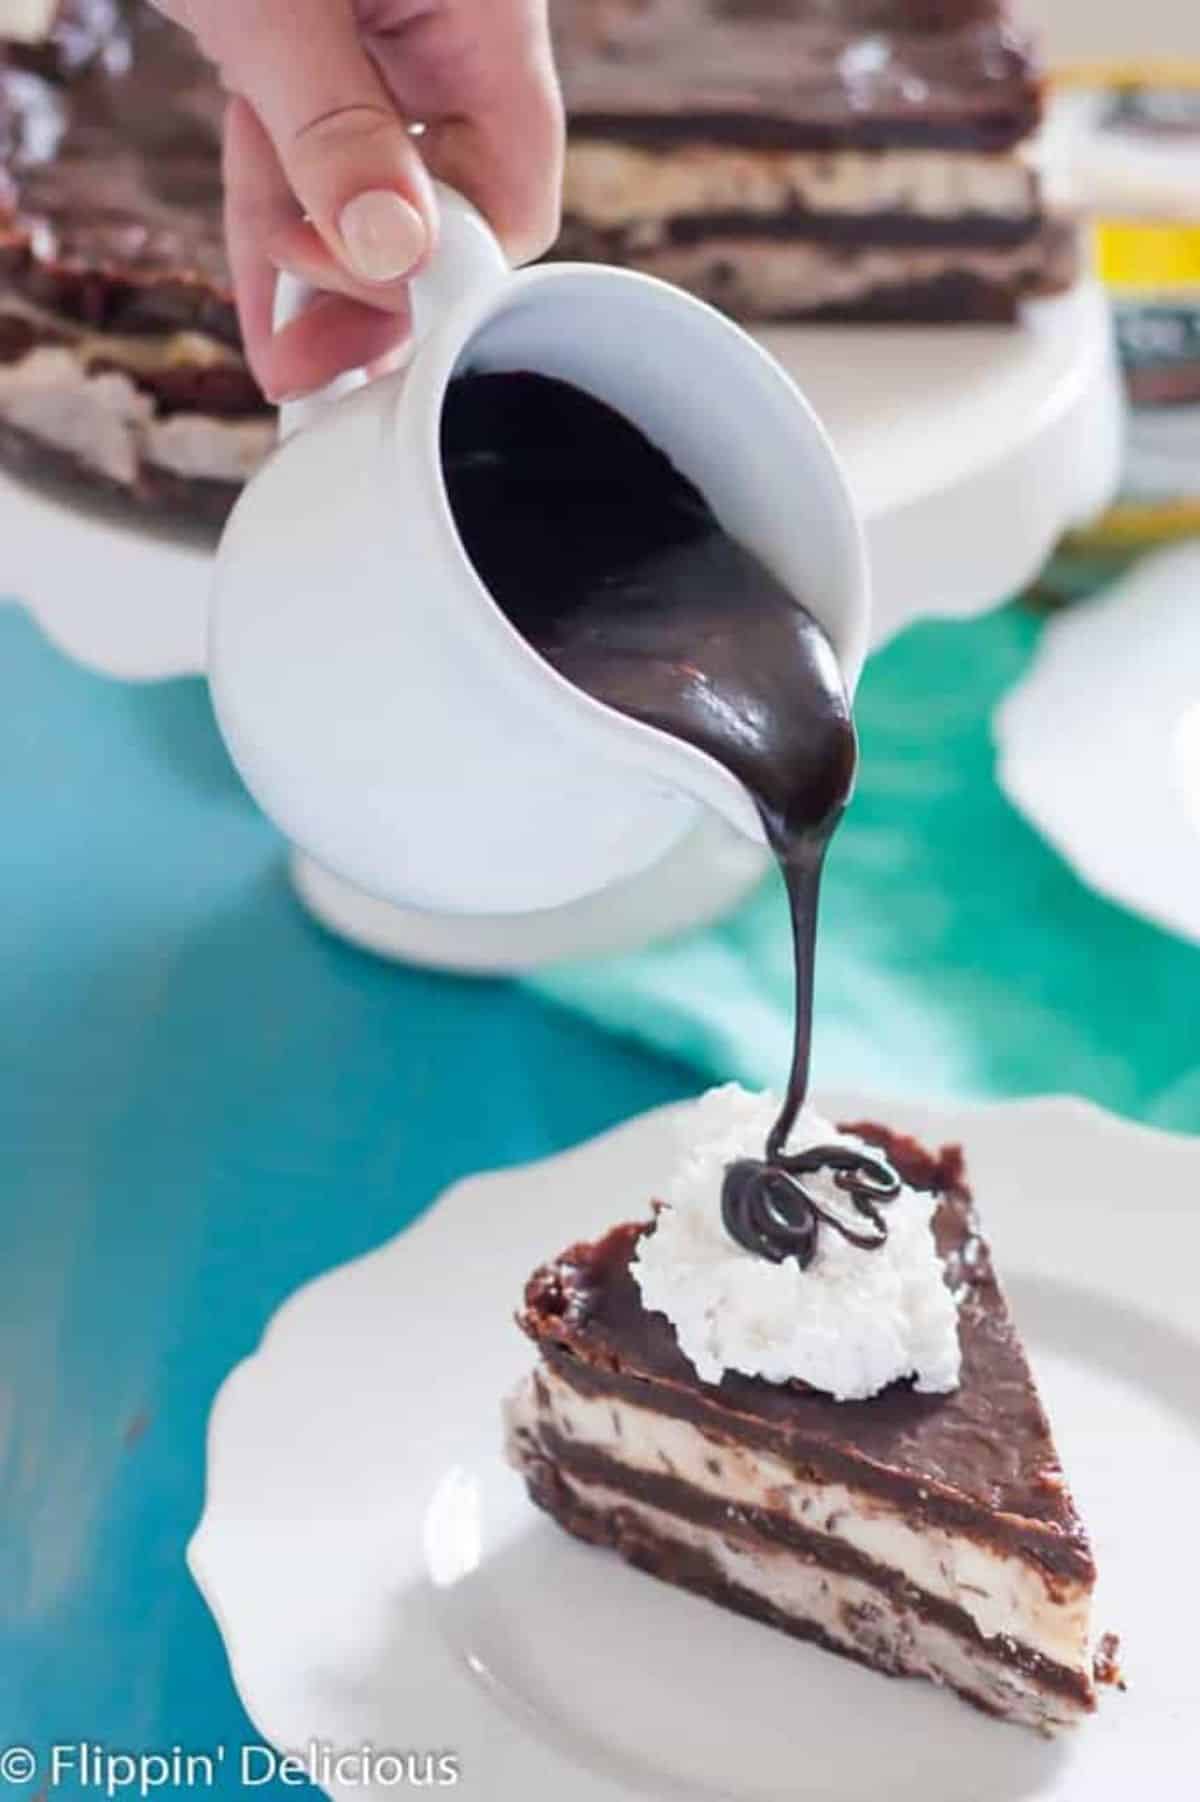 Dairy-Free Hot Fudge Sauce poured on a piece of cake.